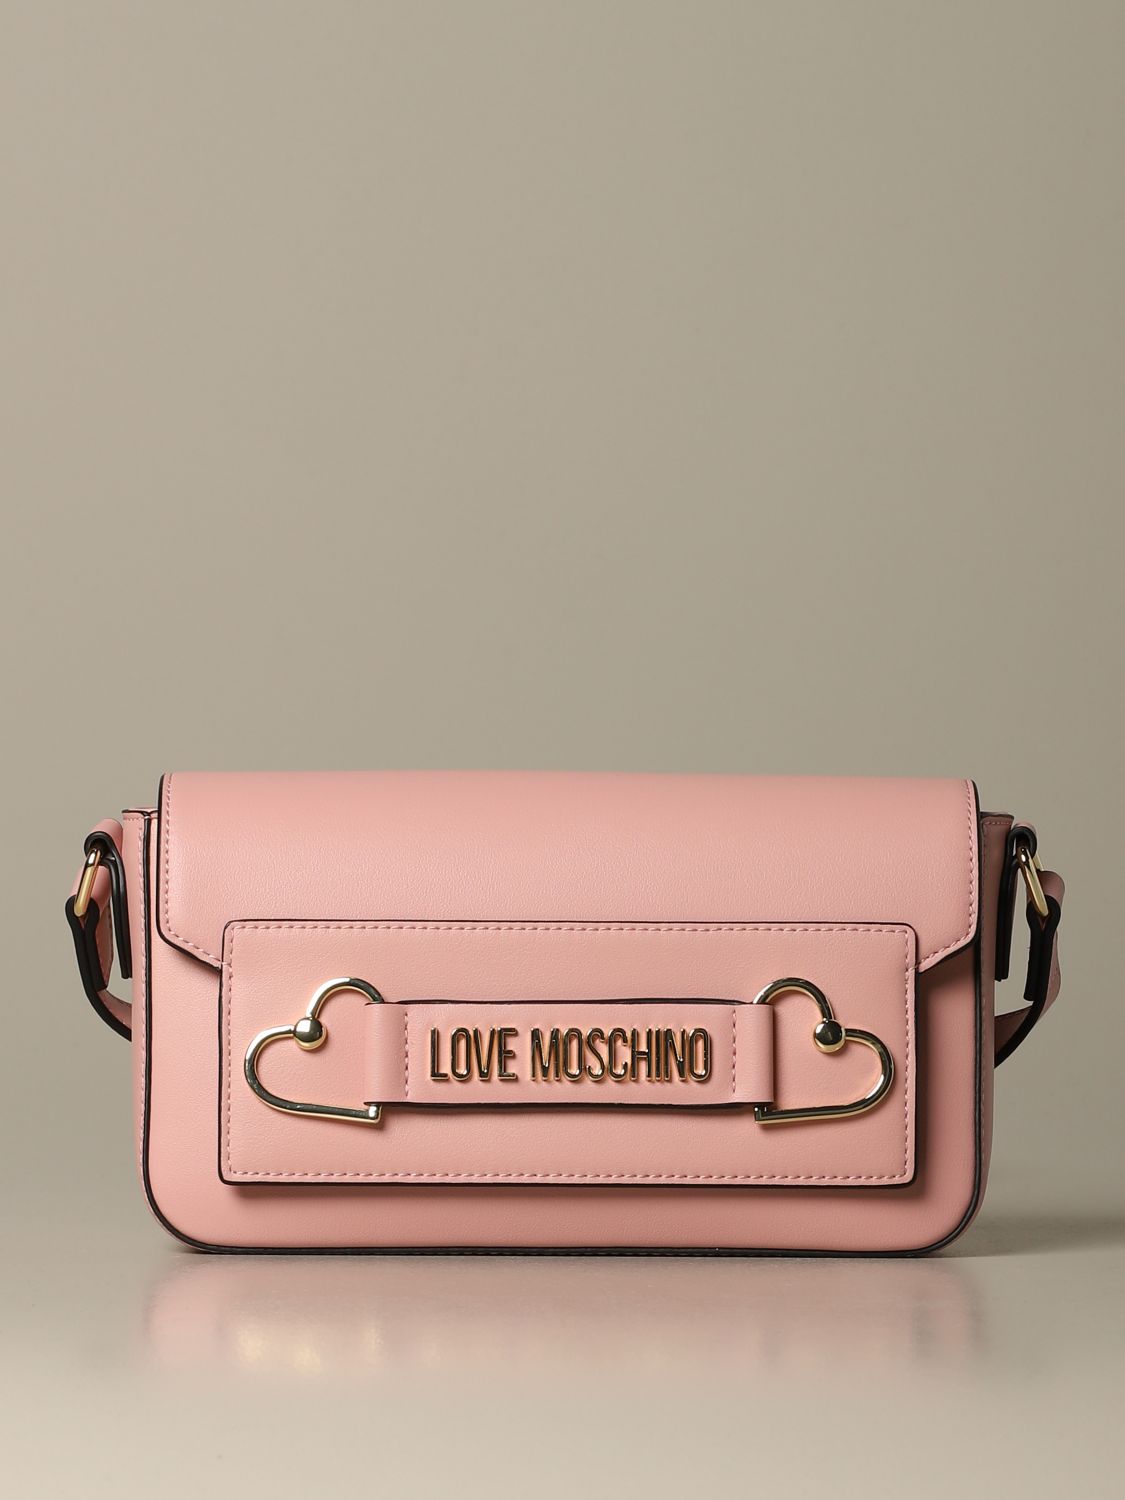 Love Moschino Outlet: handbag for woman - Blush Pink | Love Moschino